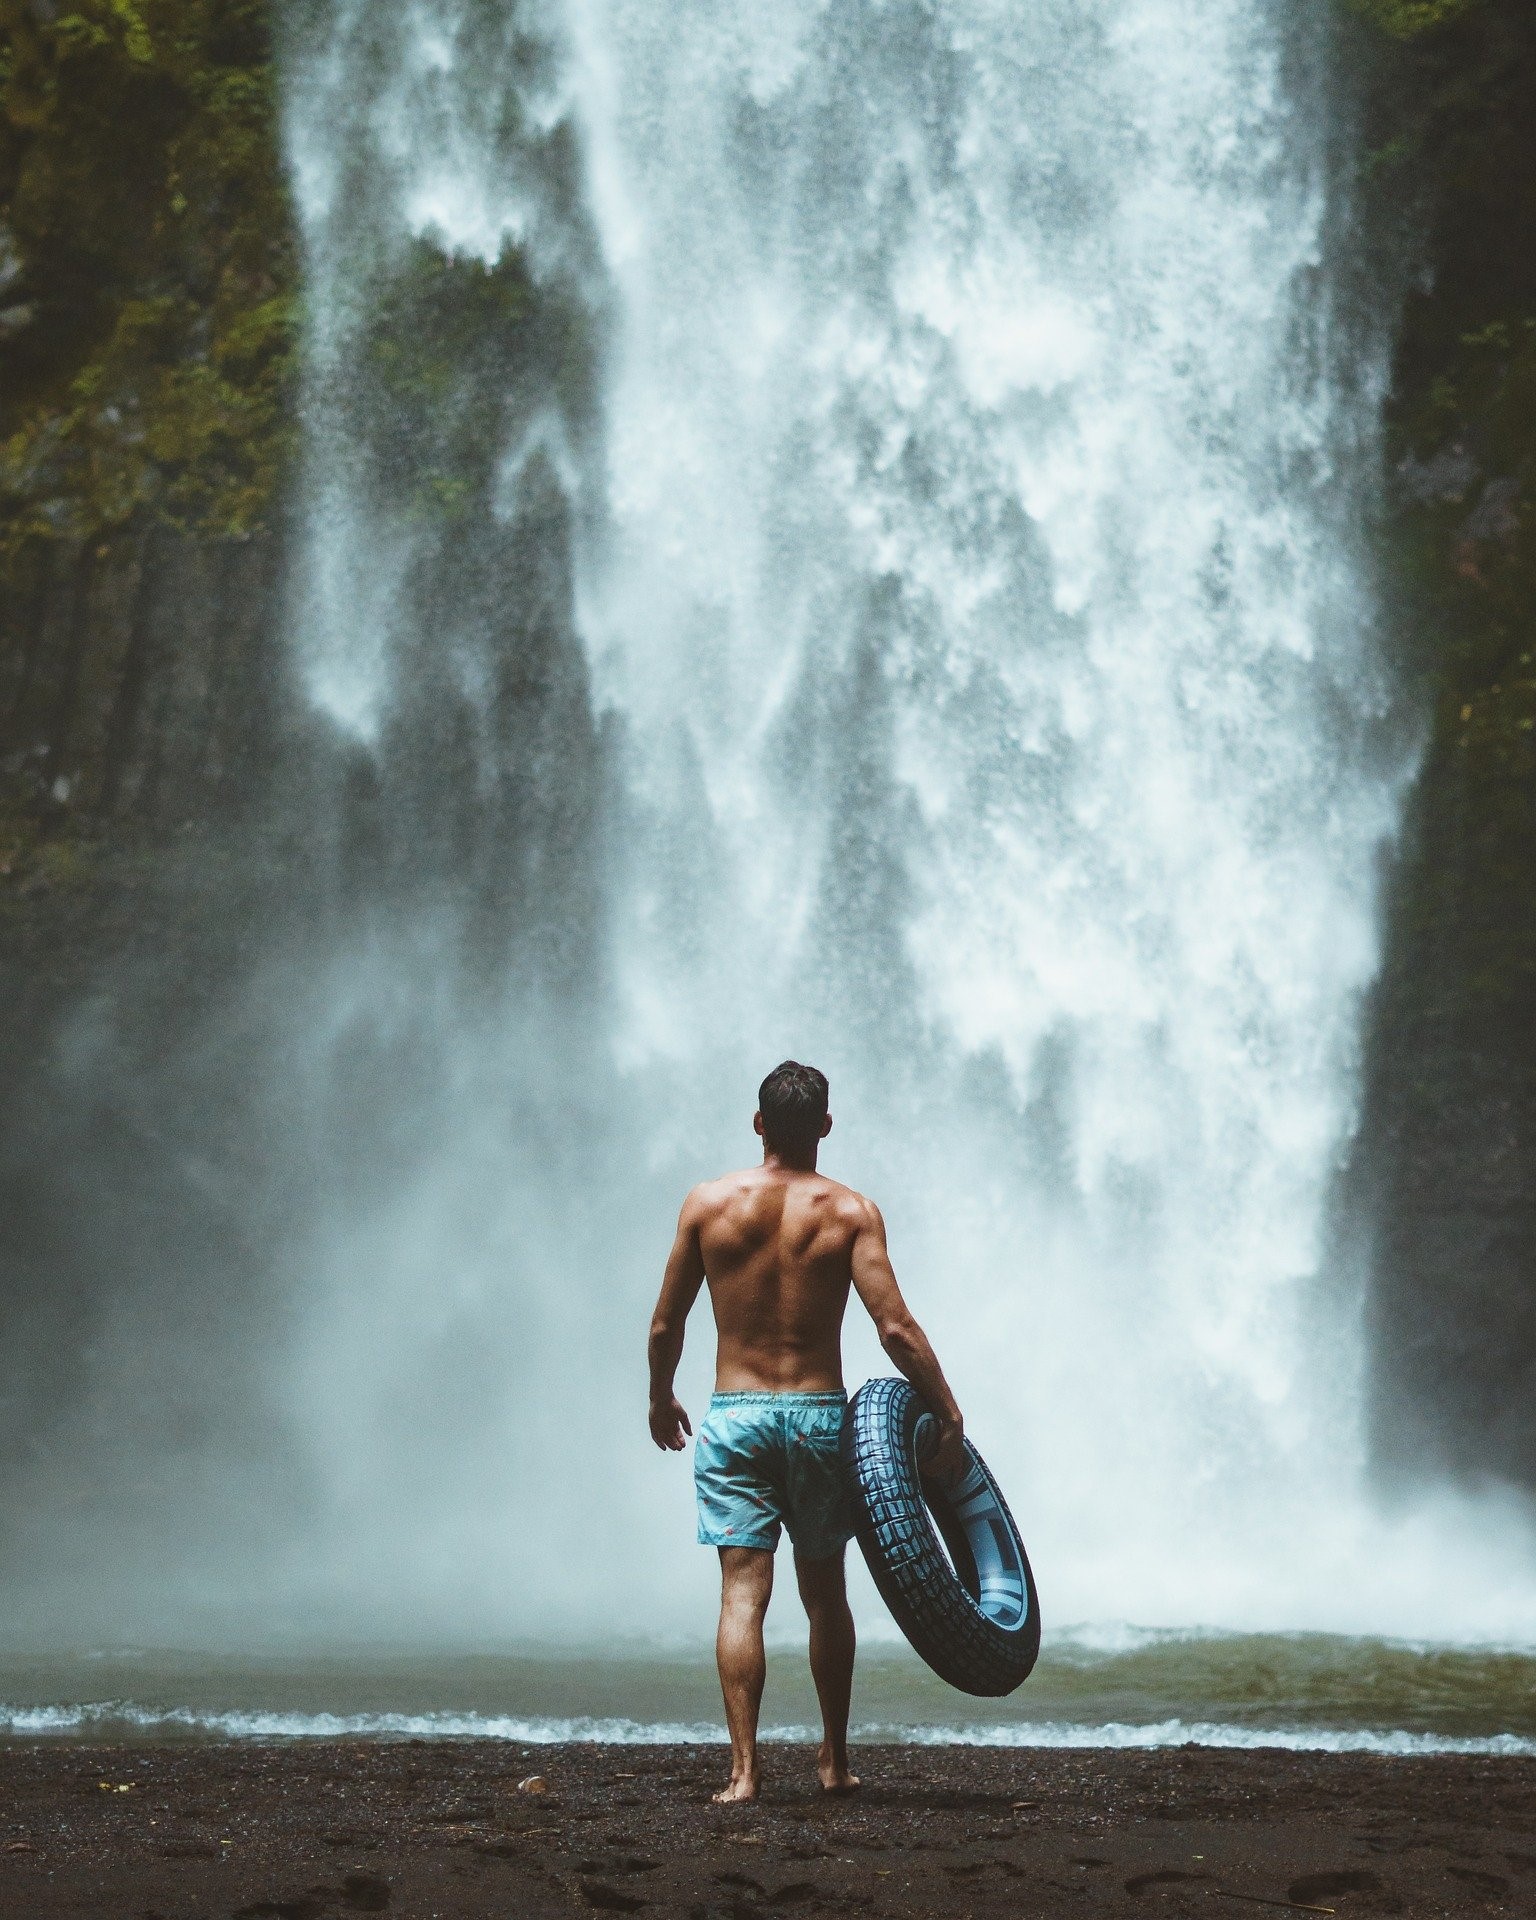 The Man at the Waterfall